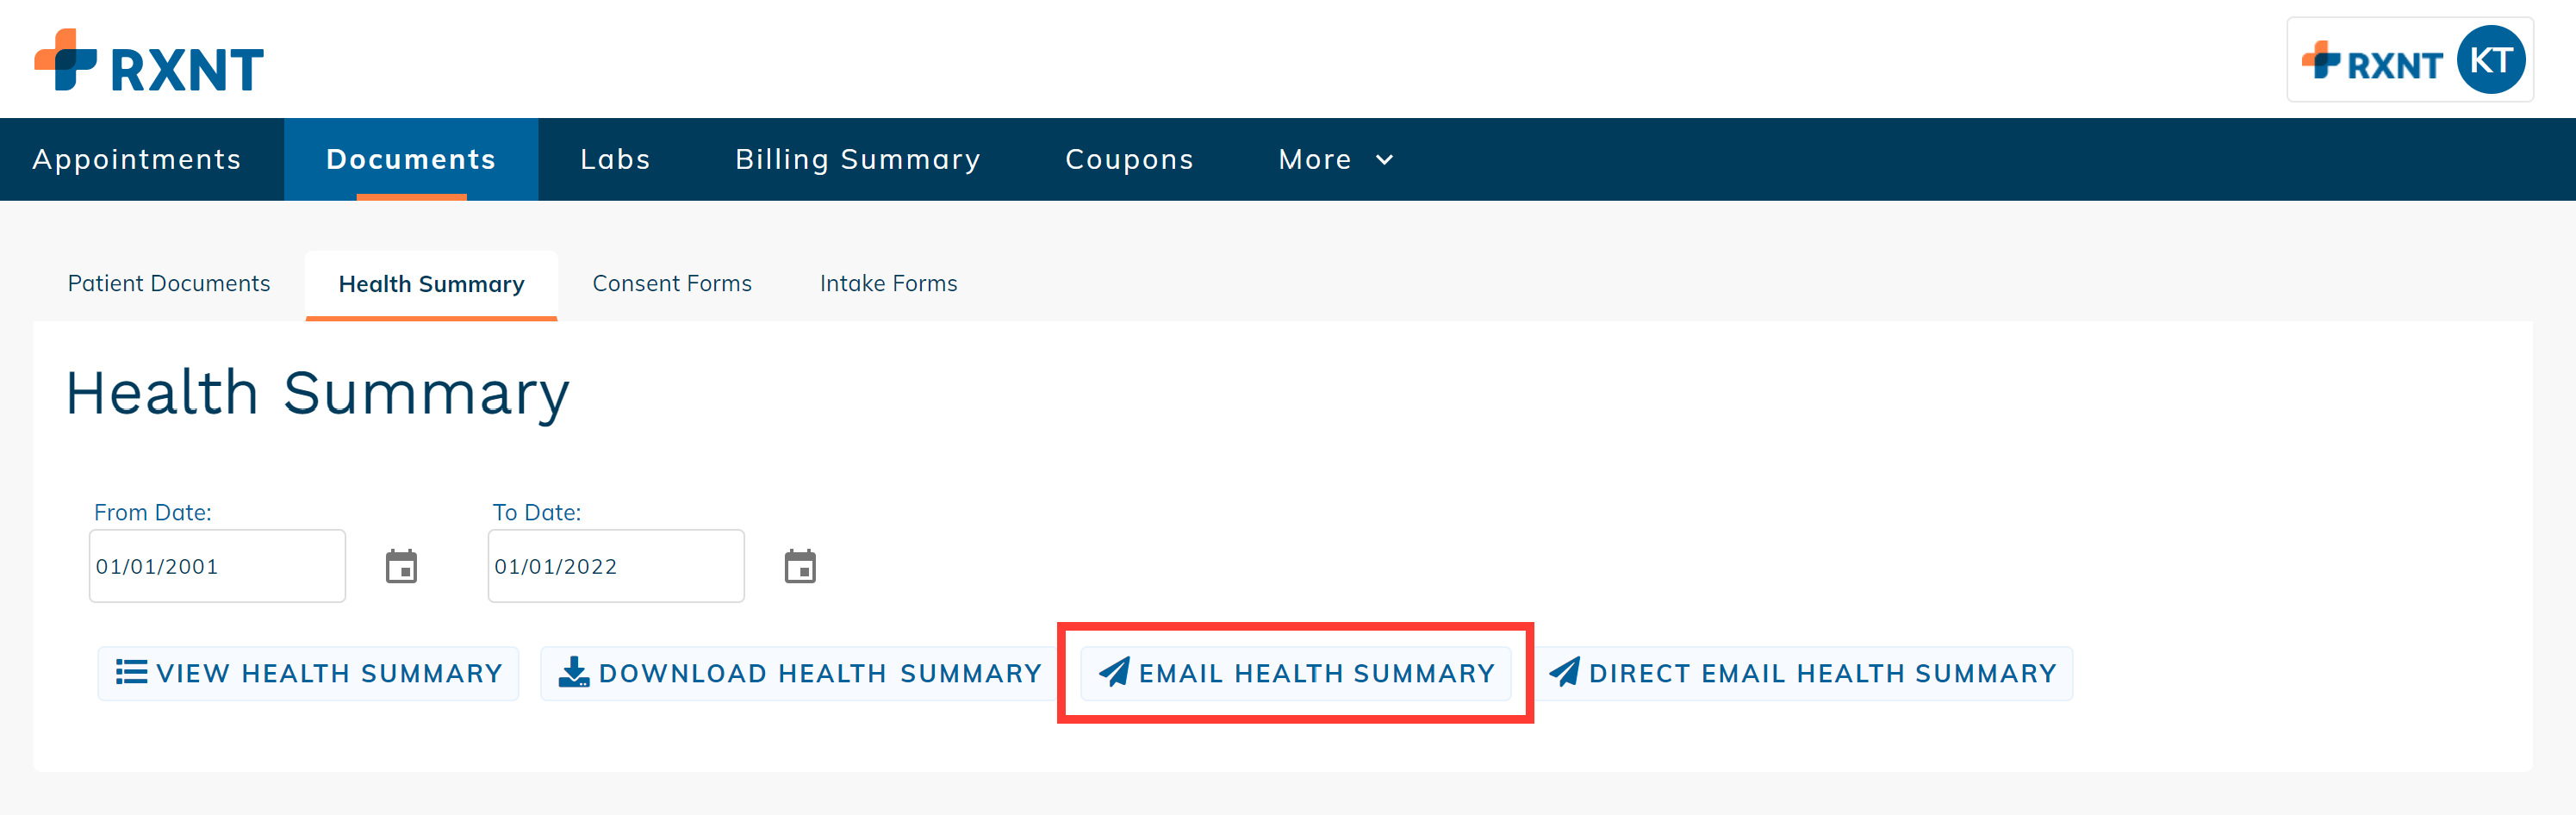 email_health_summary.png